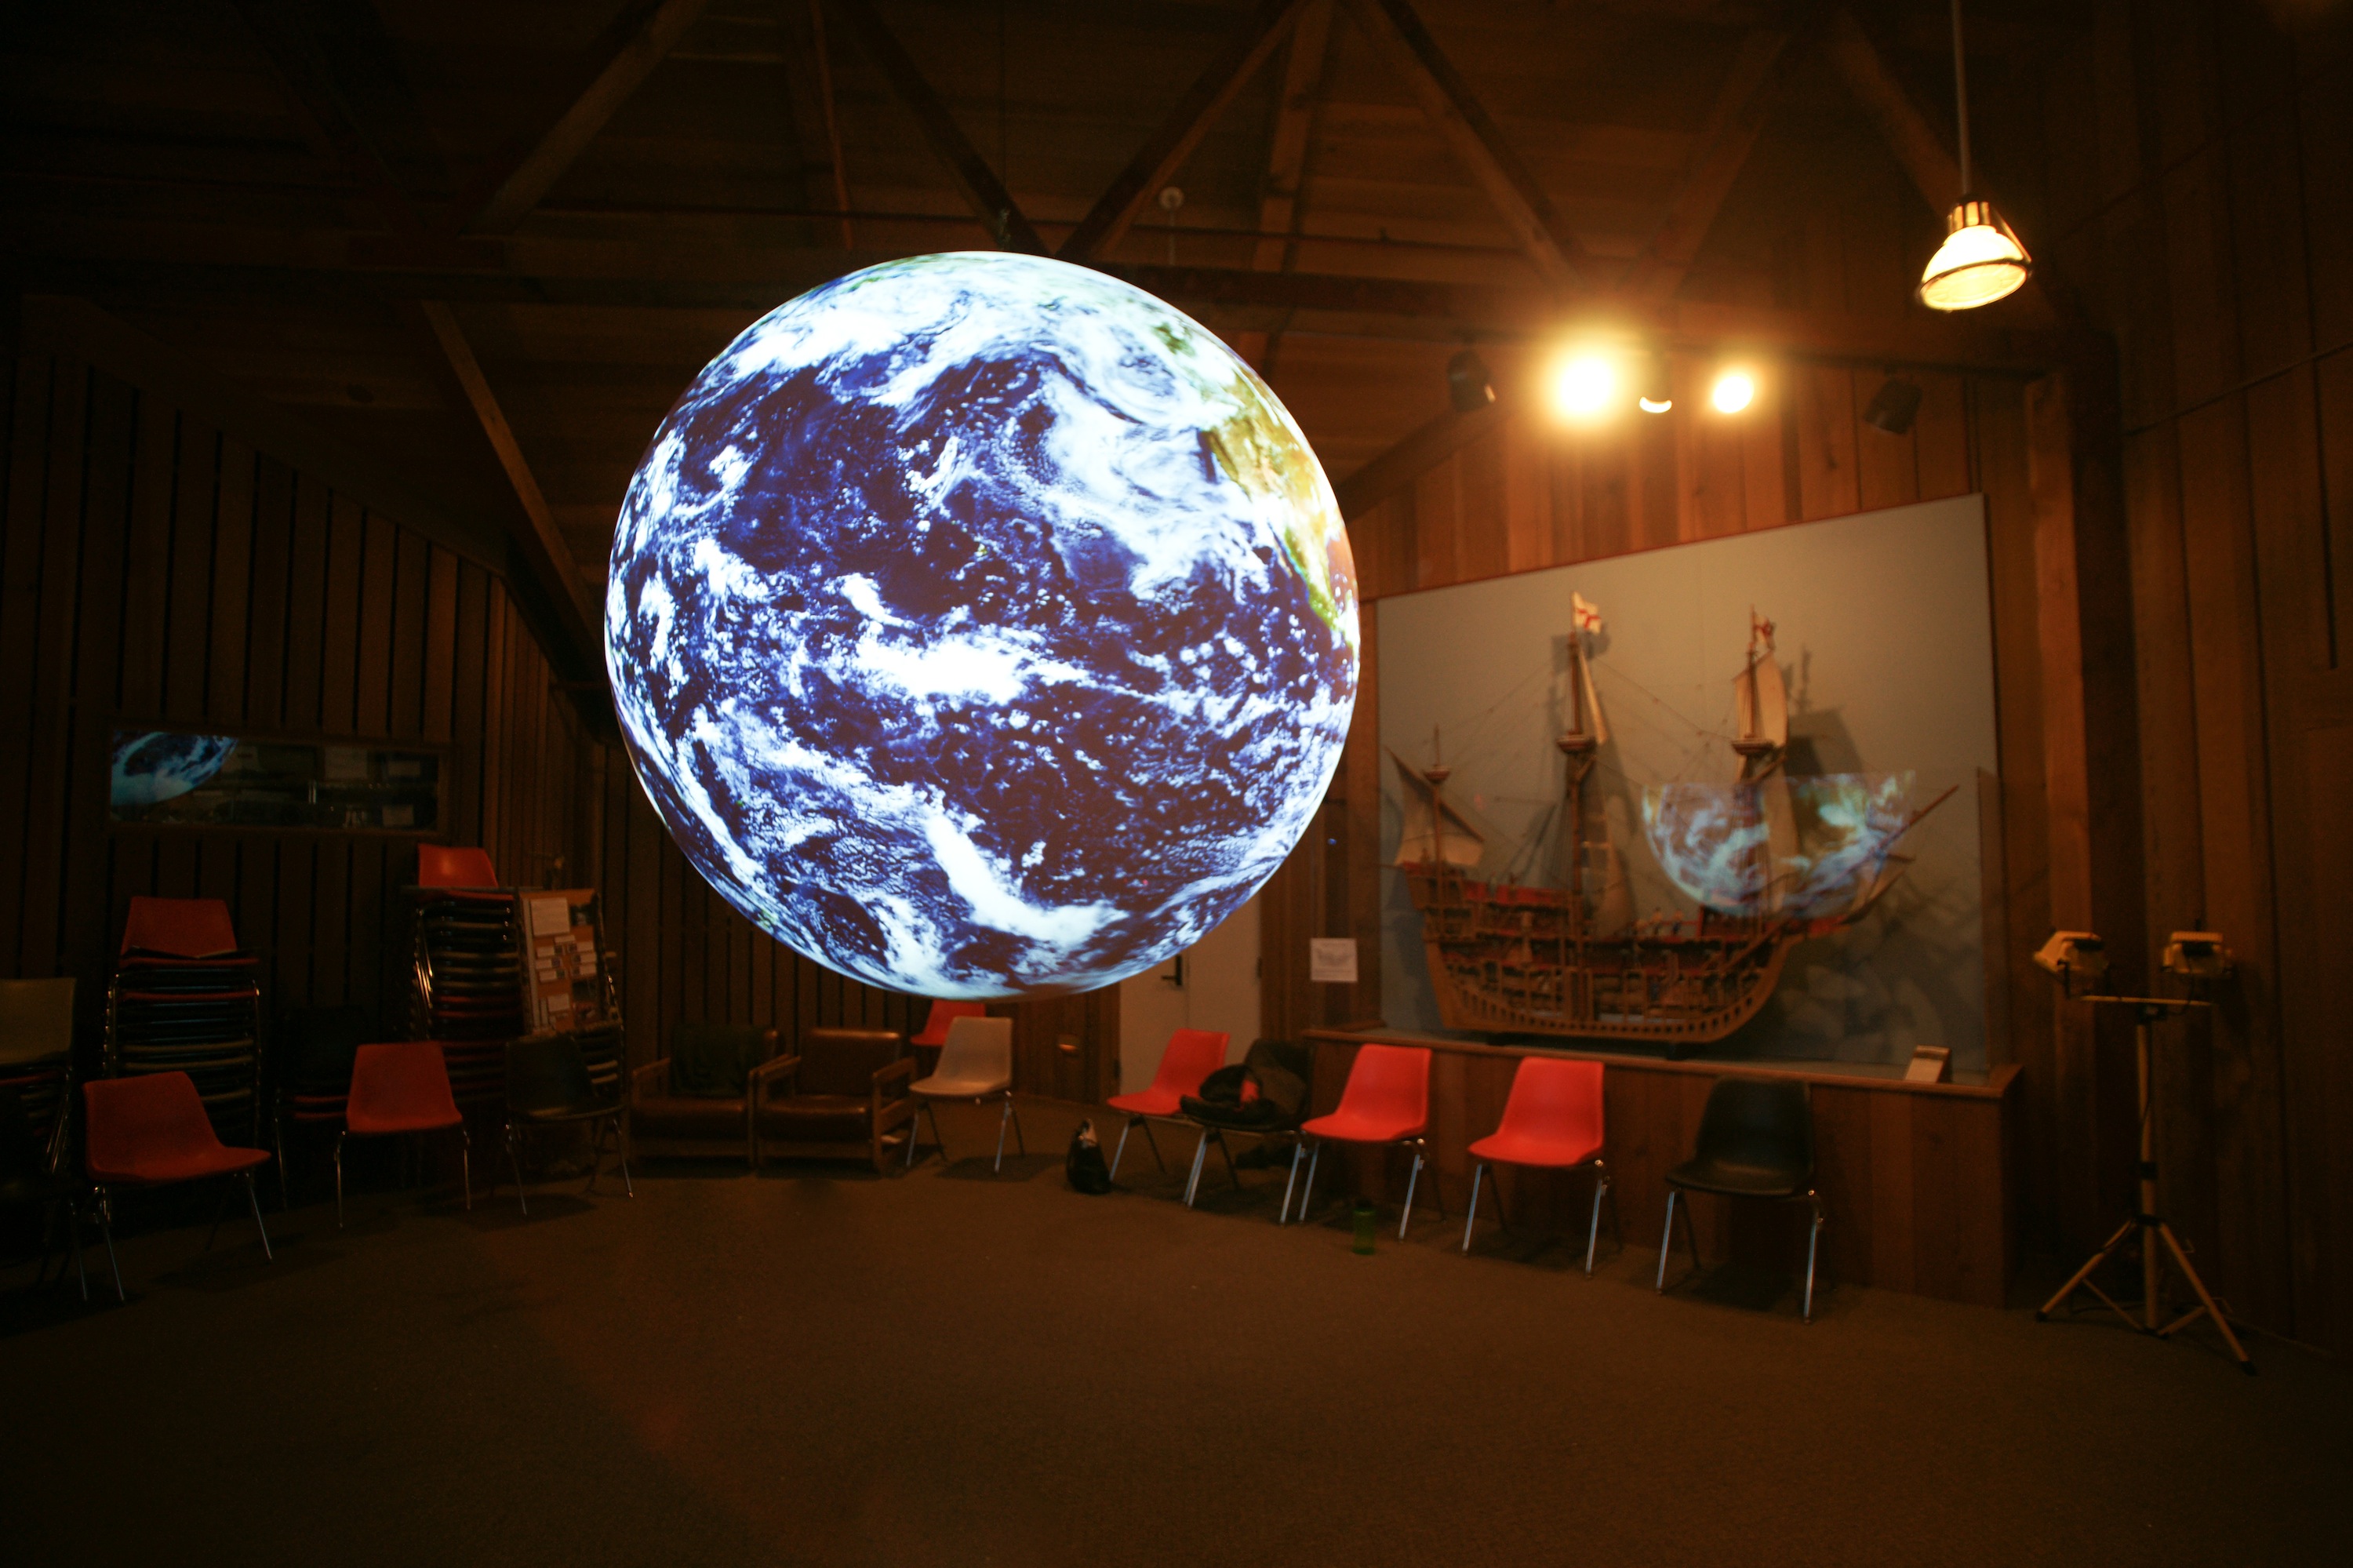 Science On a Sphere displayse satellite imagery of the Earth in a room with wooden walls. In the background the celing rafters are visible. Behind the Sphere sit stacks of chairs and a cross-section of an old sailing ship